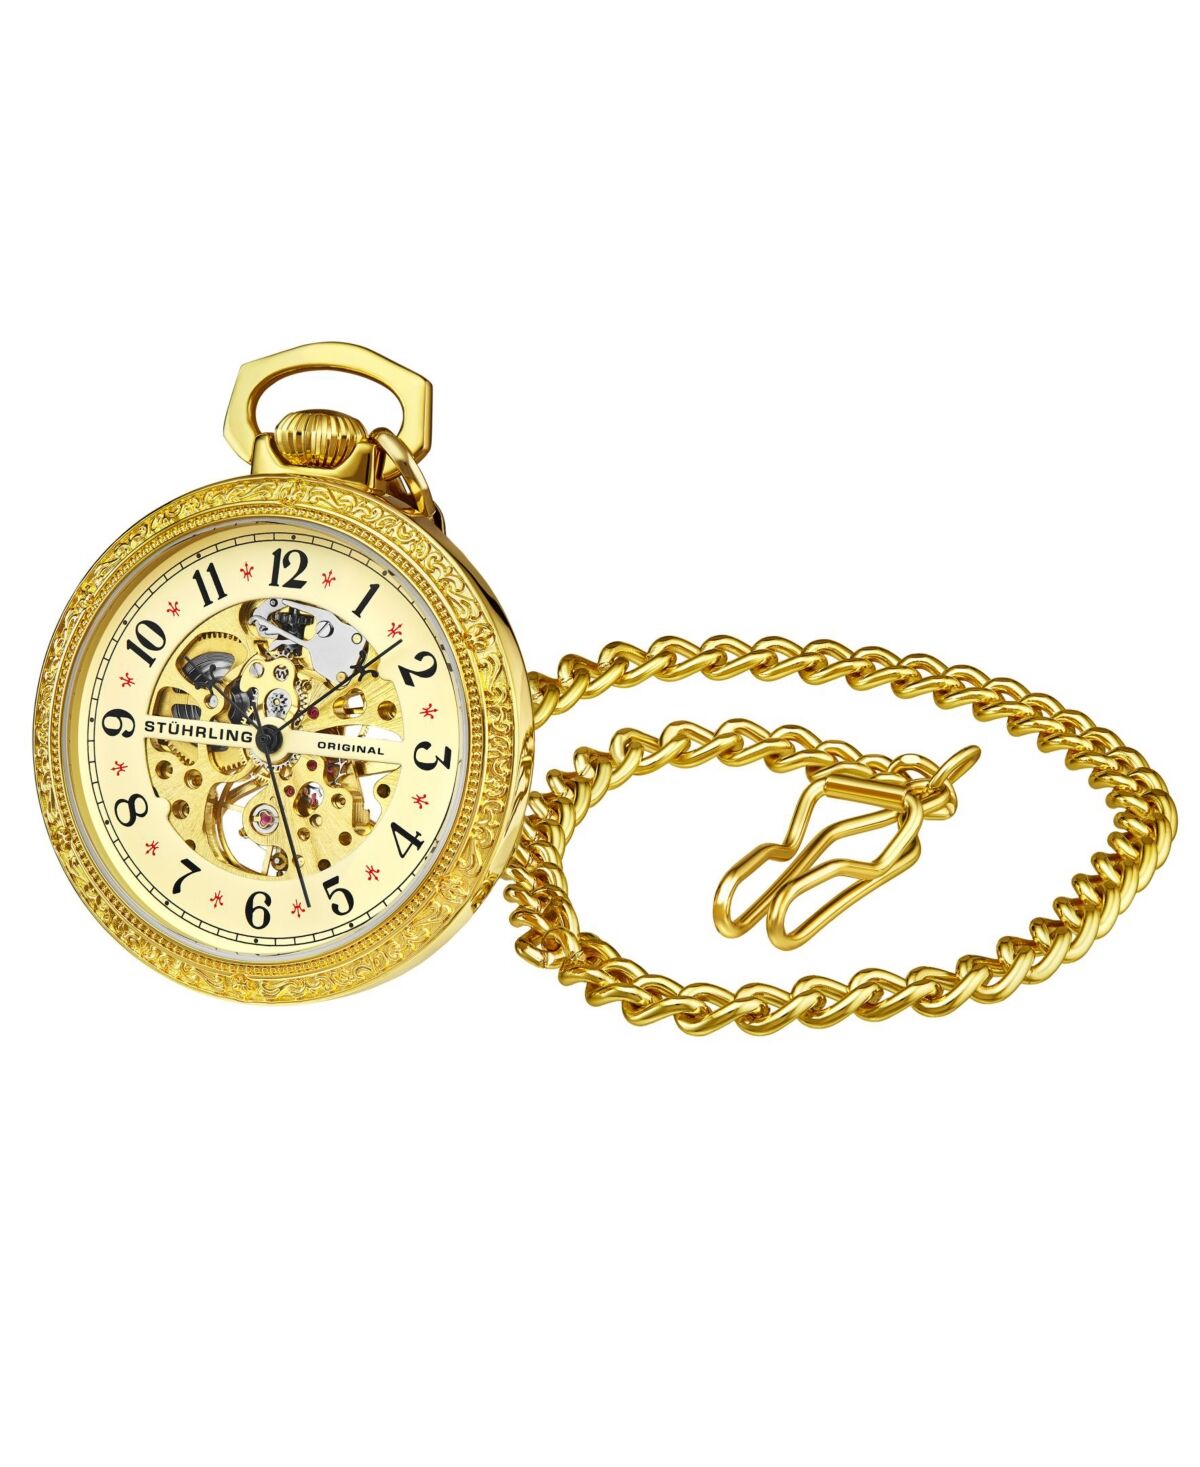 Stuhrling Women's Gold Tone Stainless Steel Chain Pocket Watch 48mm - Silver